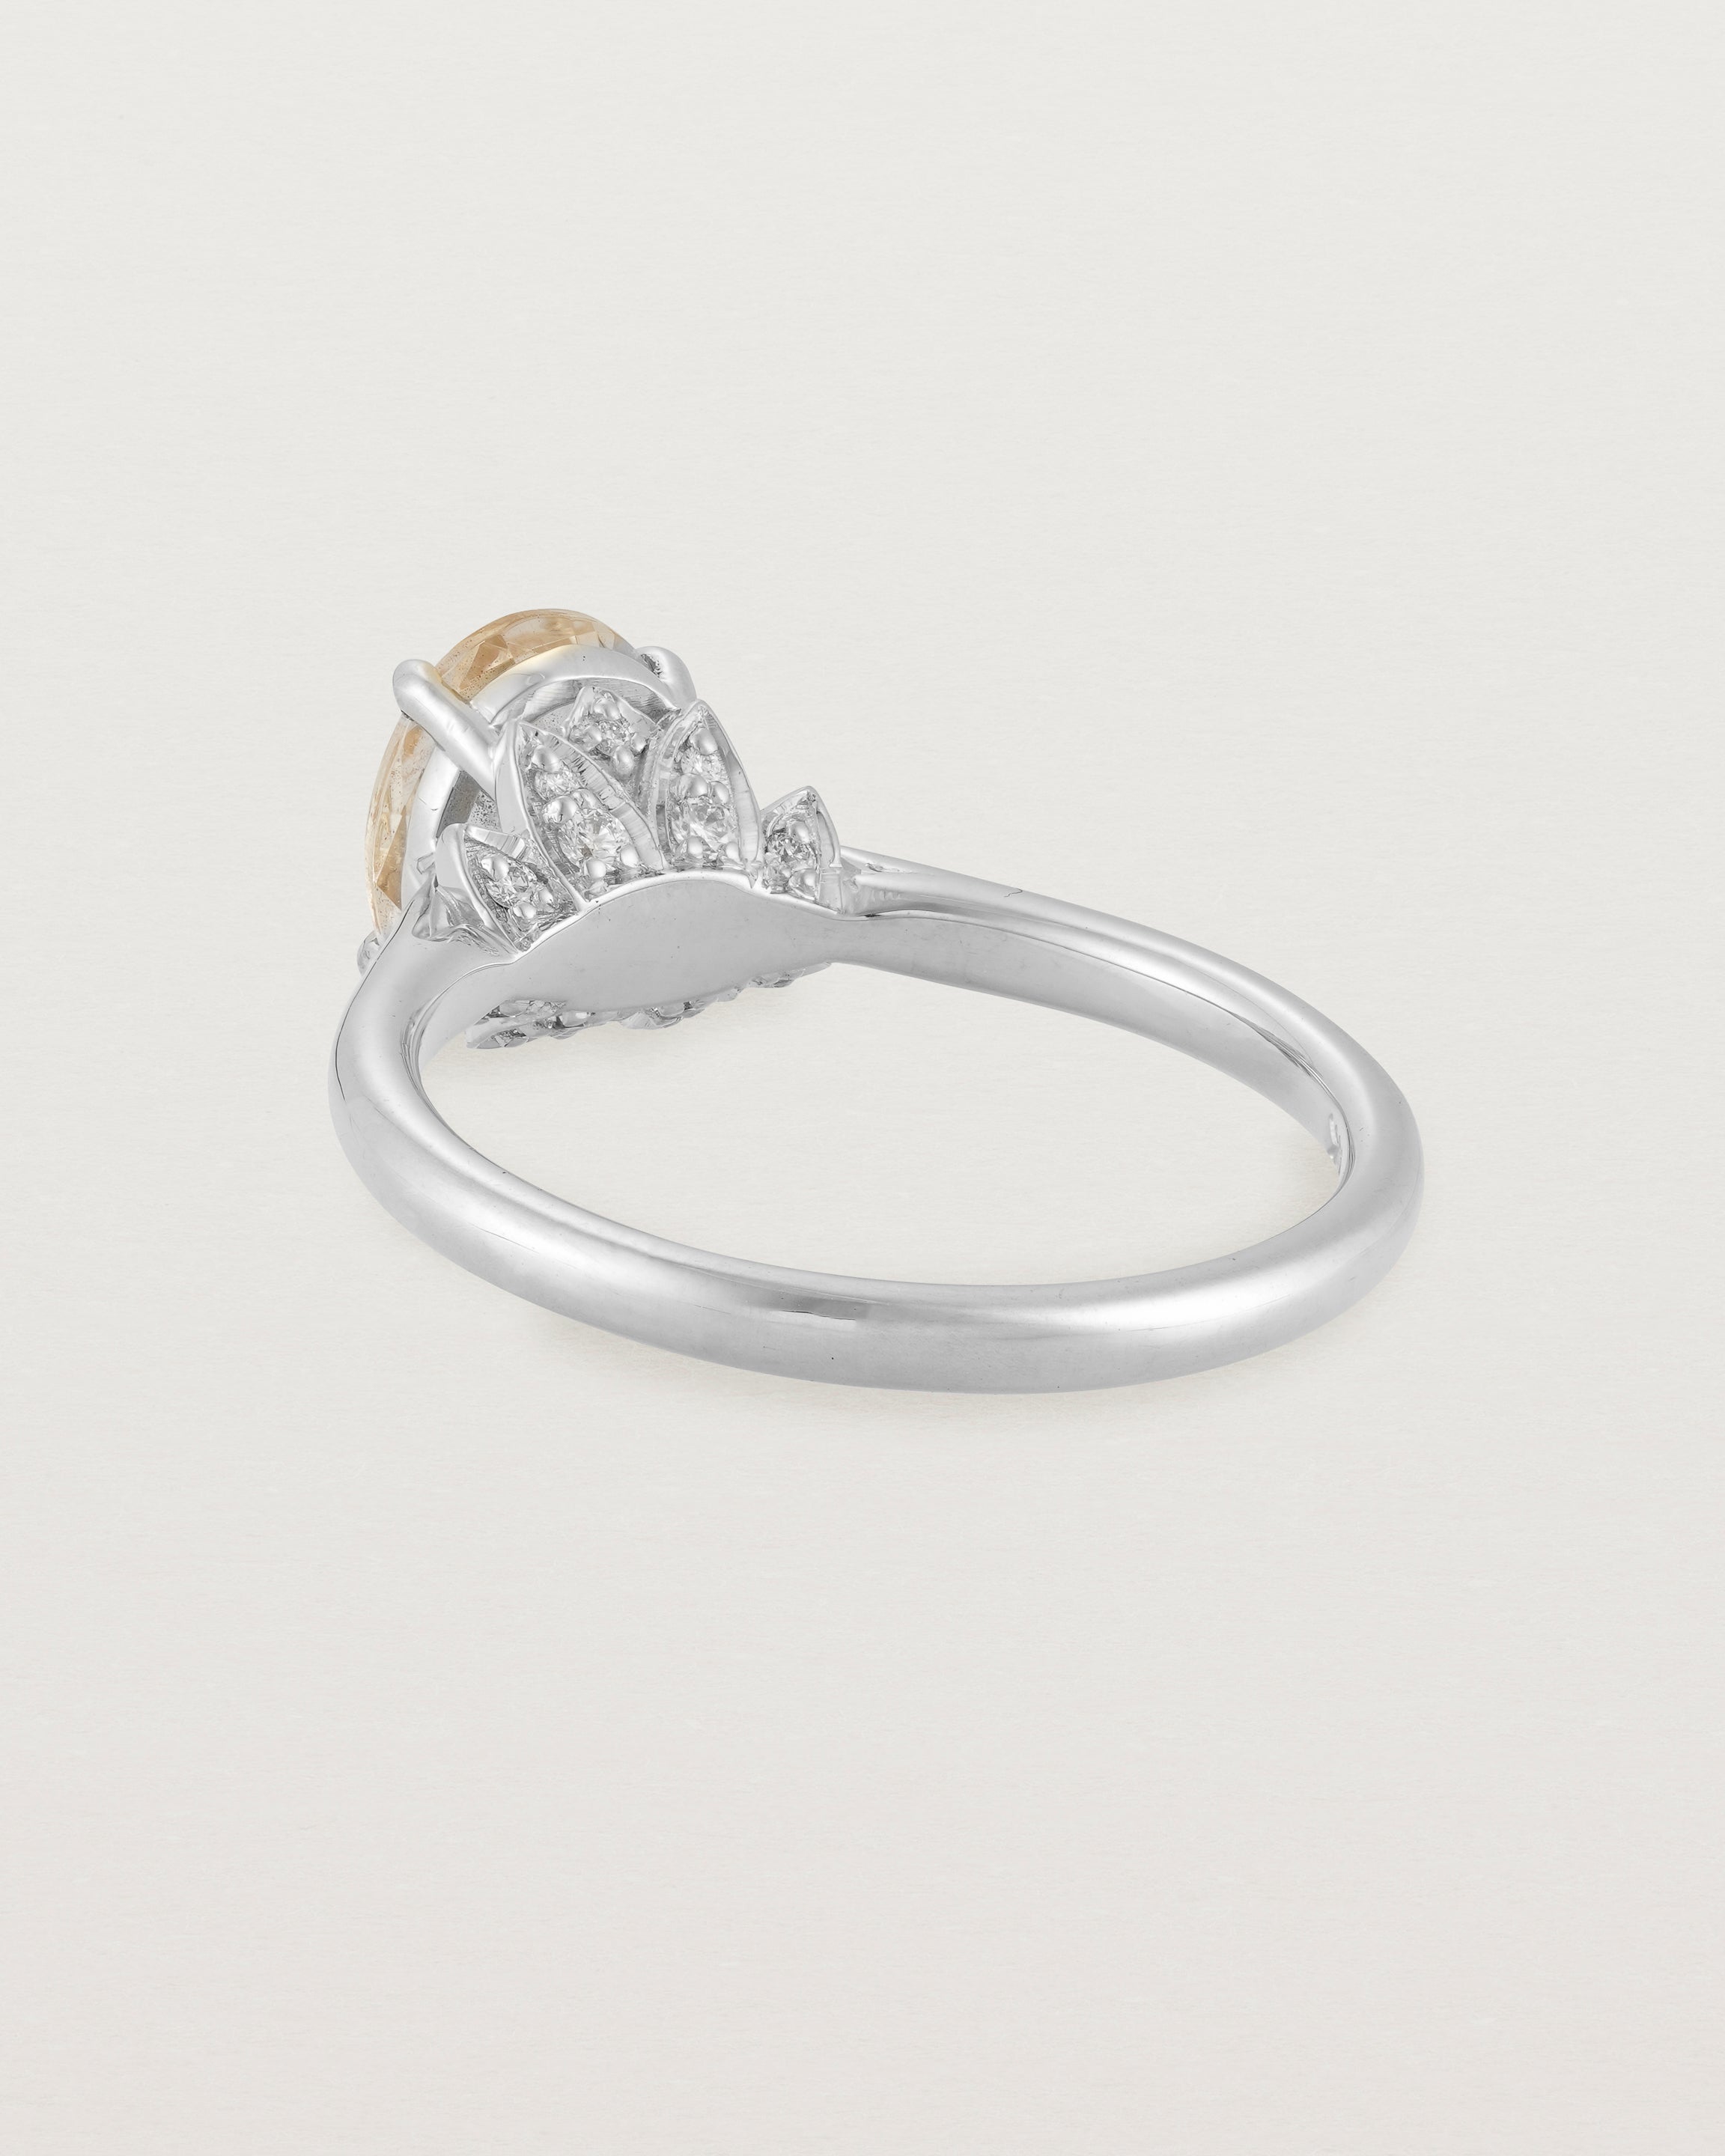 Back view of the Kalina Oval Solitaire | Savannah Sunstone | White Gold.